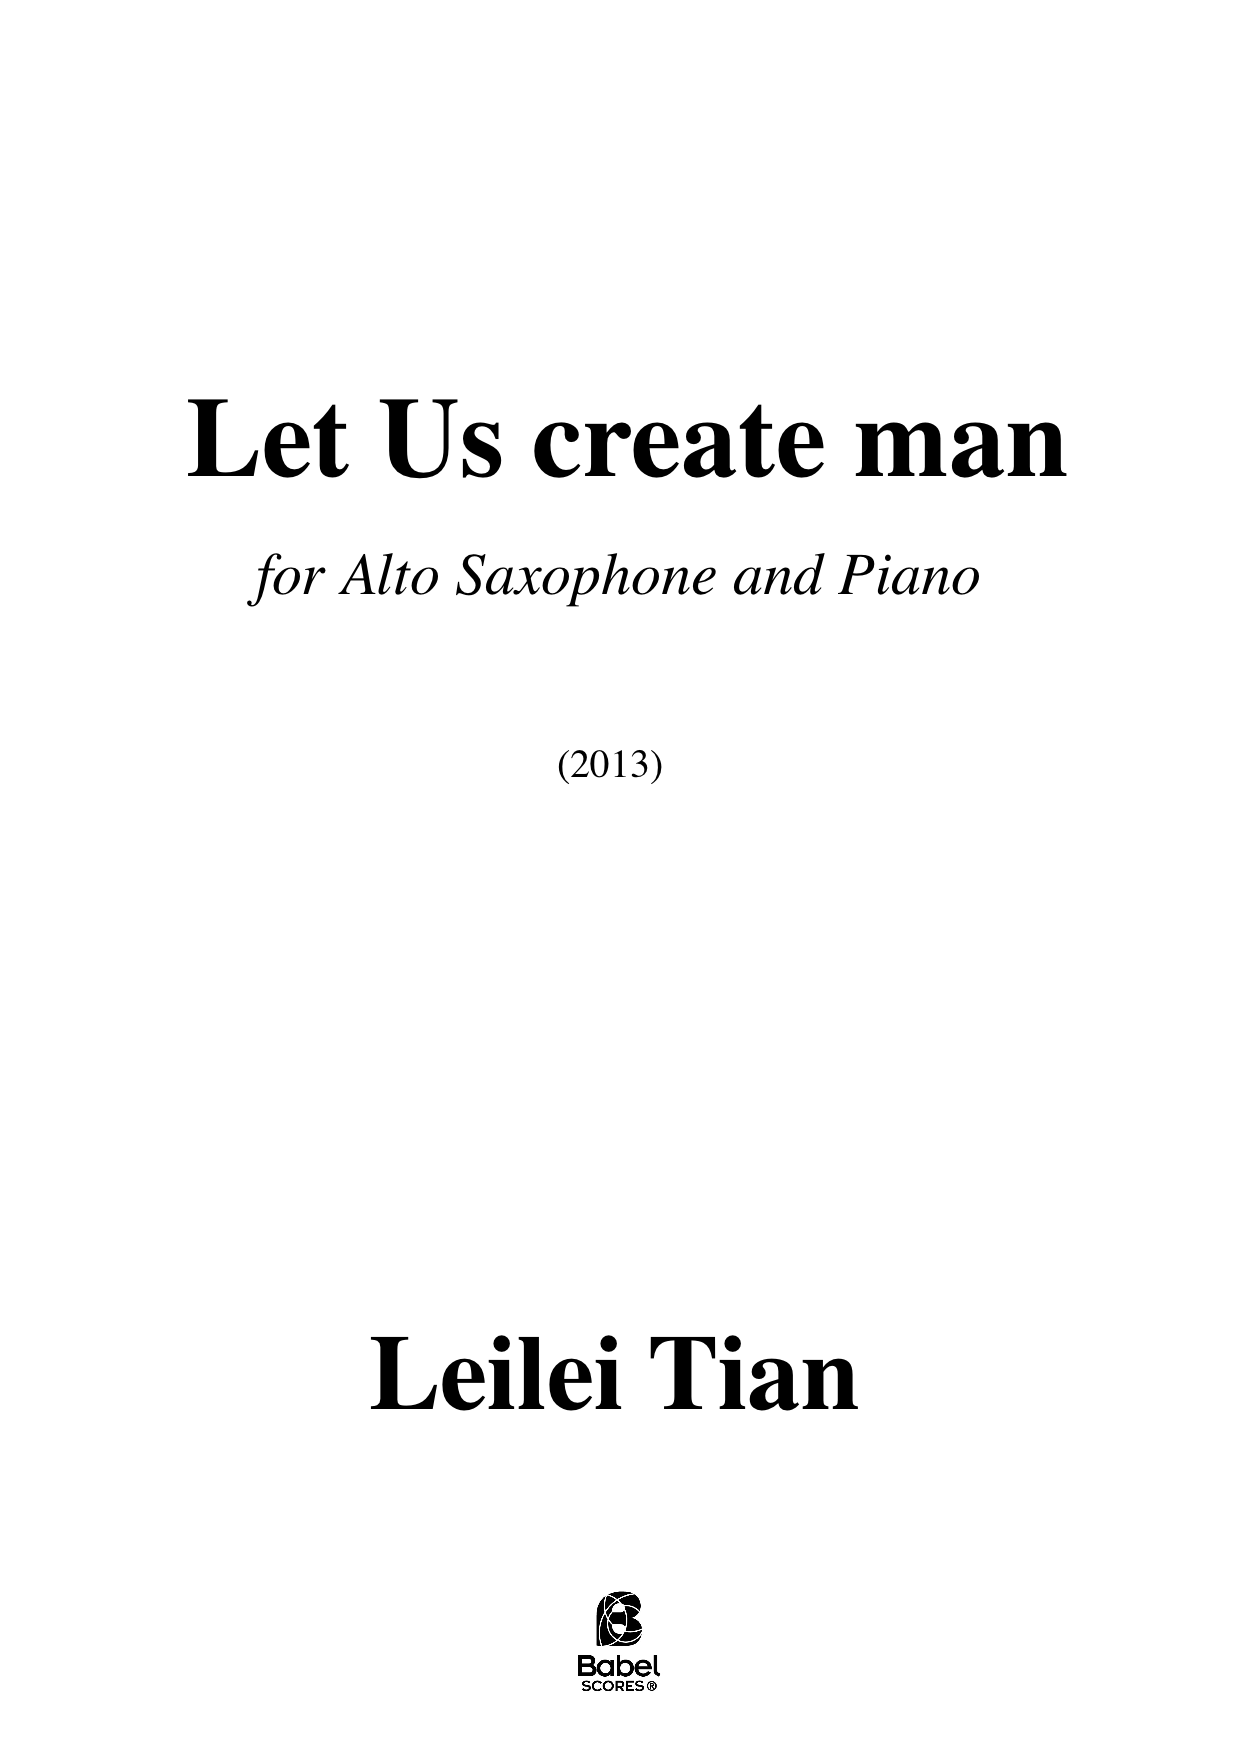 Let Us create man in C A4 z 1 01